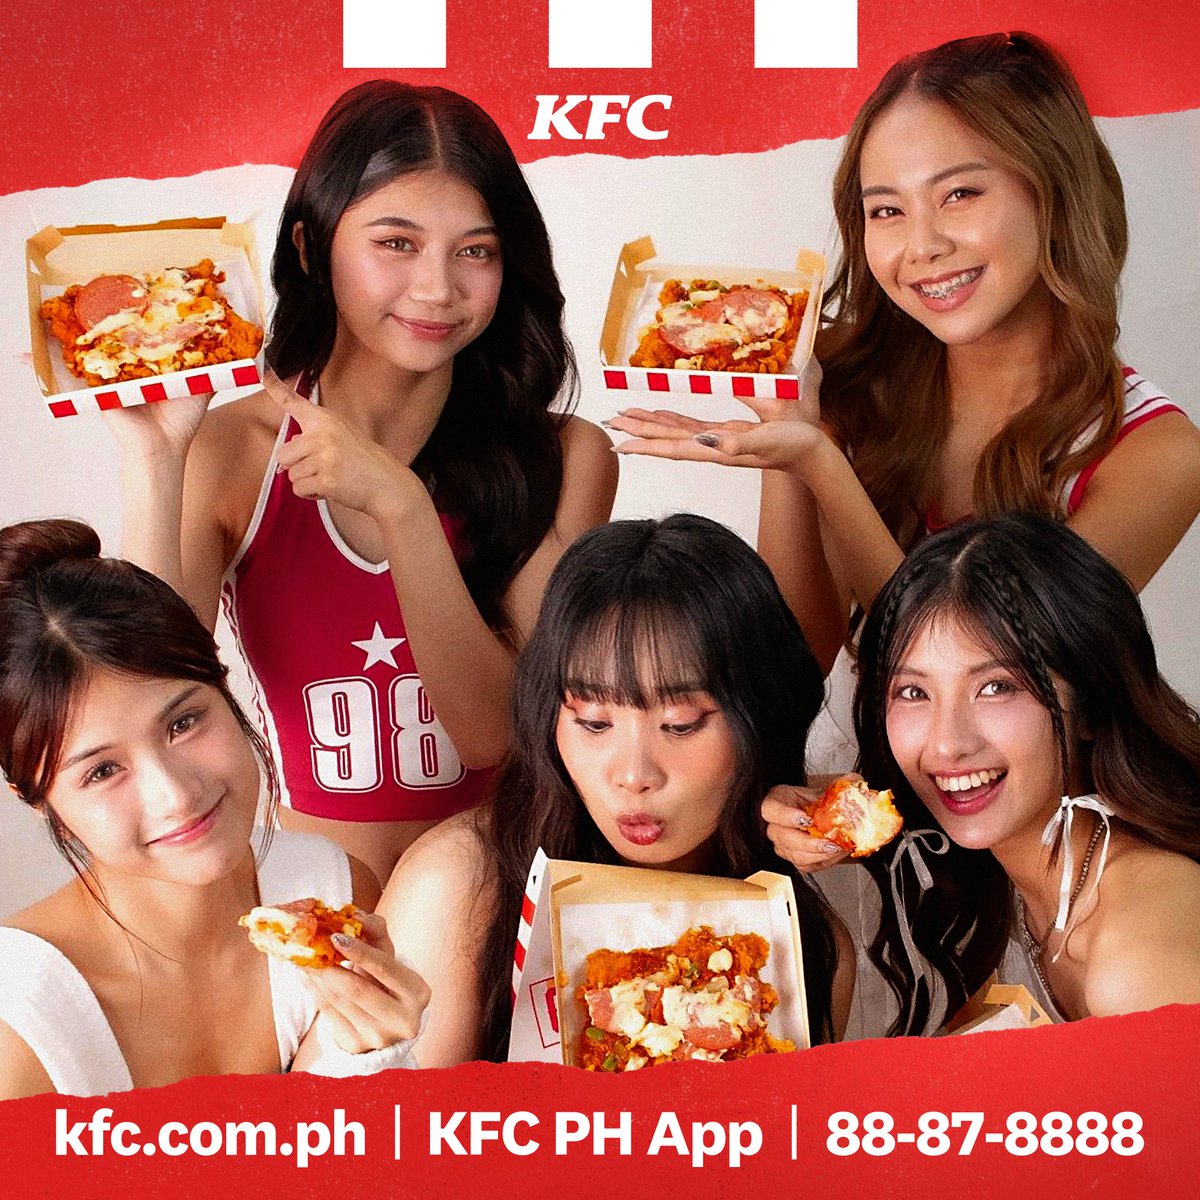 Turn up your barkada bonding with a Chizza feast like KAIA! 👯‍♀️Gather your foodie squad for a Chizza adventure, loaded with cheese and toppings! 🍗🍕#YasssChizza #KFCxKAIA Get your KFC fix through kfc.com.ph, KFC App, 88-87-8888, GrabFood, or foodpanda.